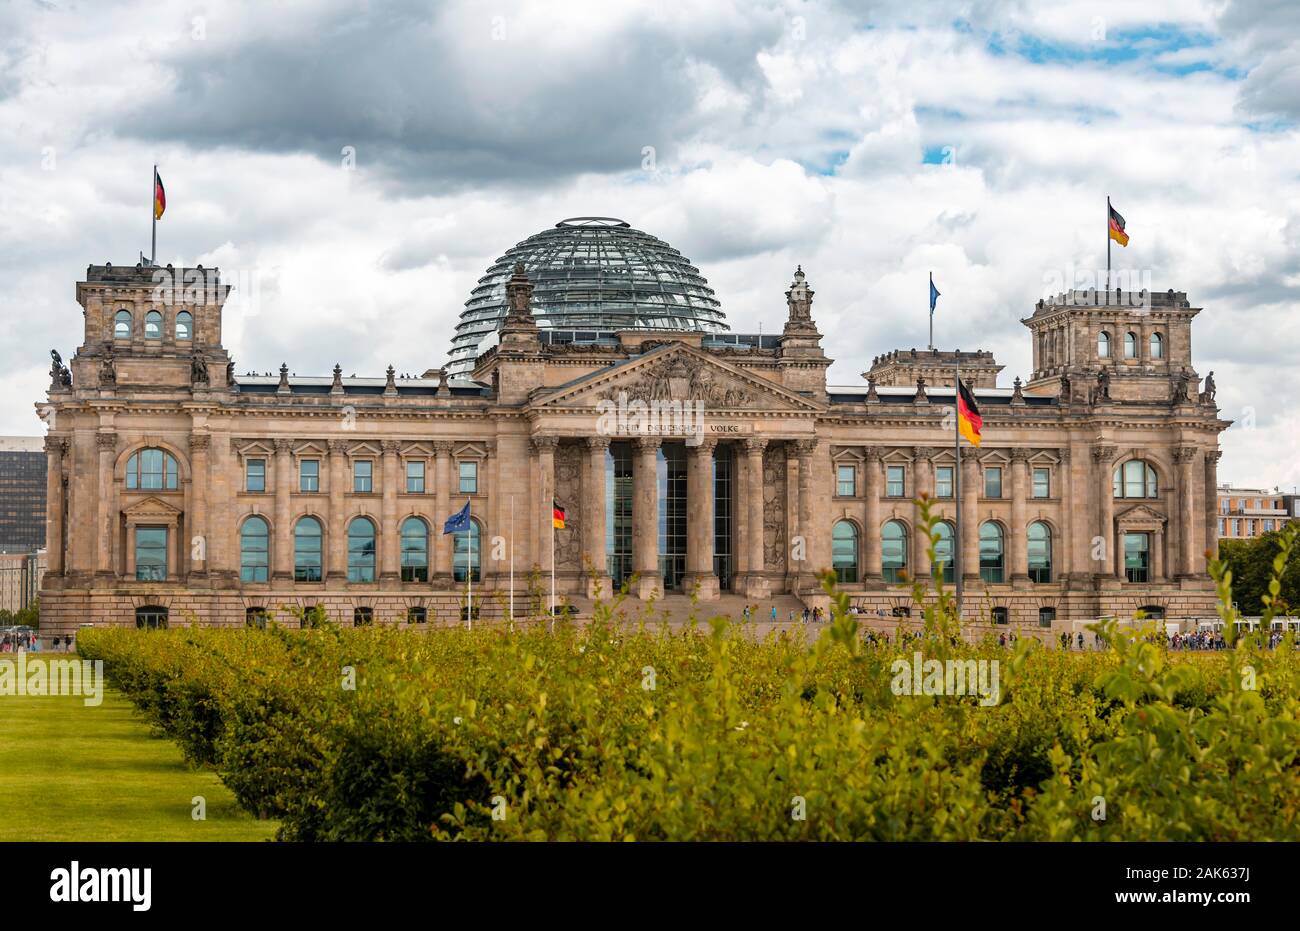 German flag flying next to the Reichstag or German parliament building, Regierungsviertel or government quarter, Berlin, Germany, Europe Stock Photo